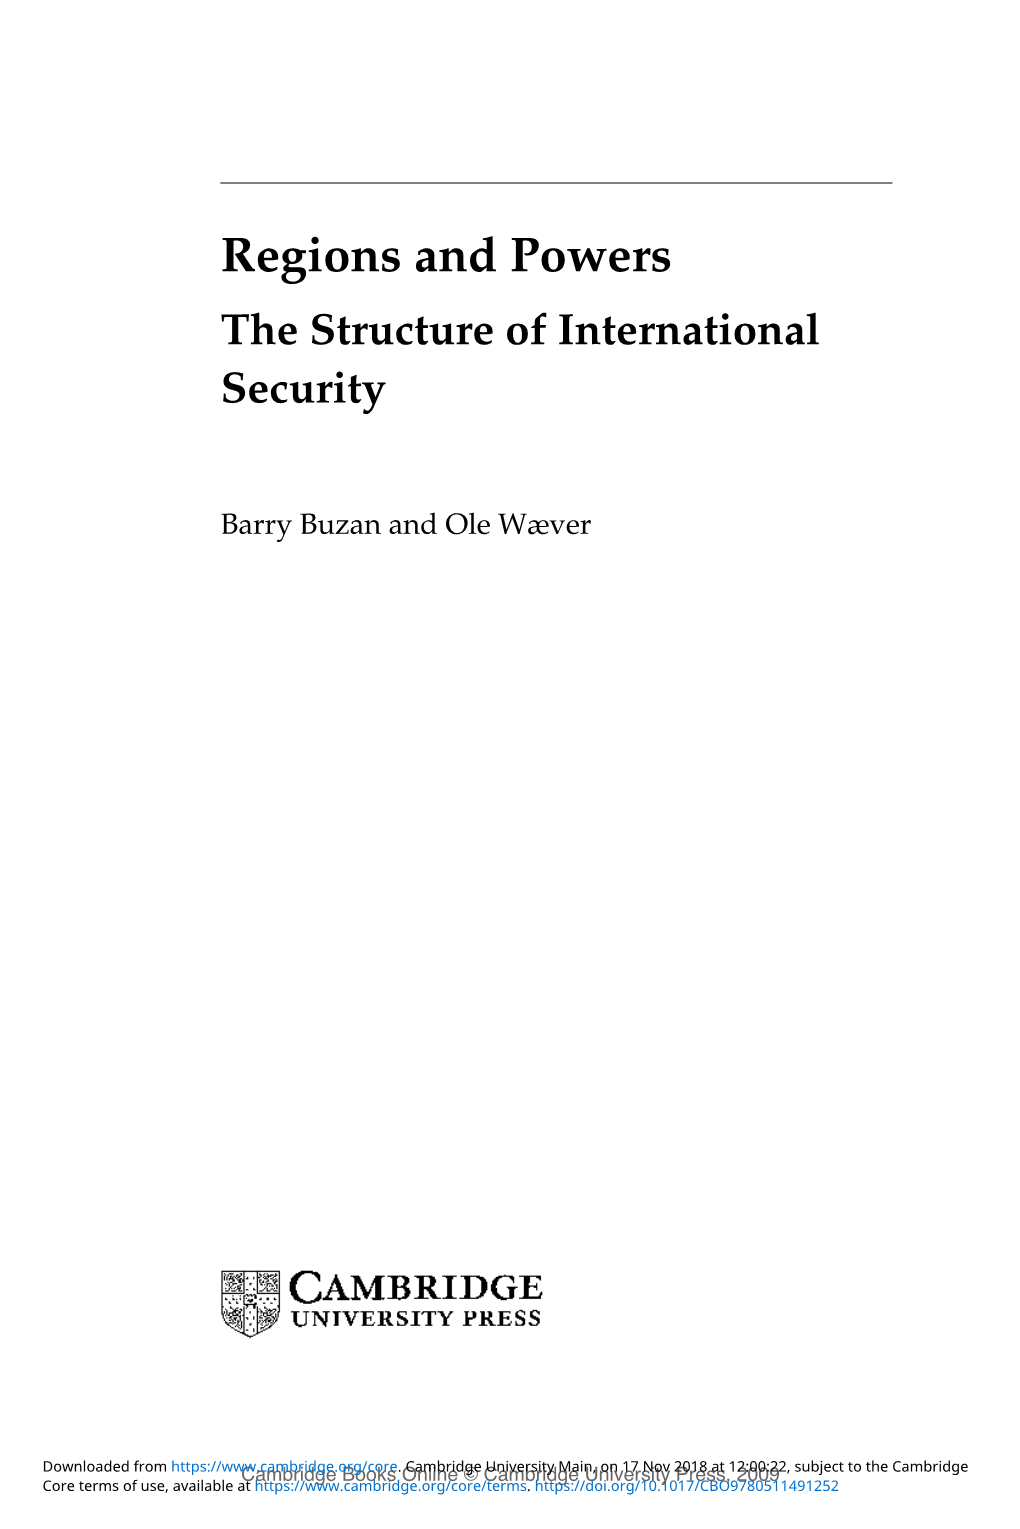 Regions and Powers the Structure of International Security